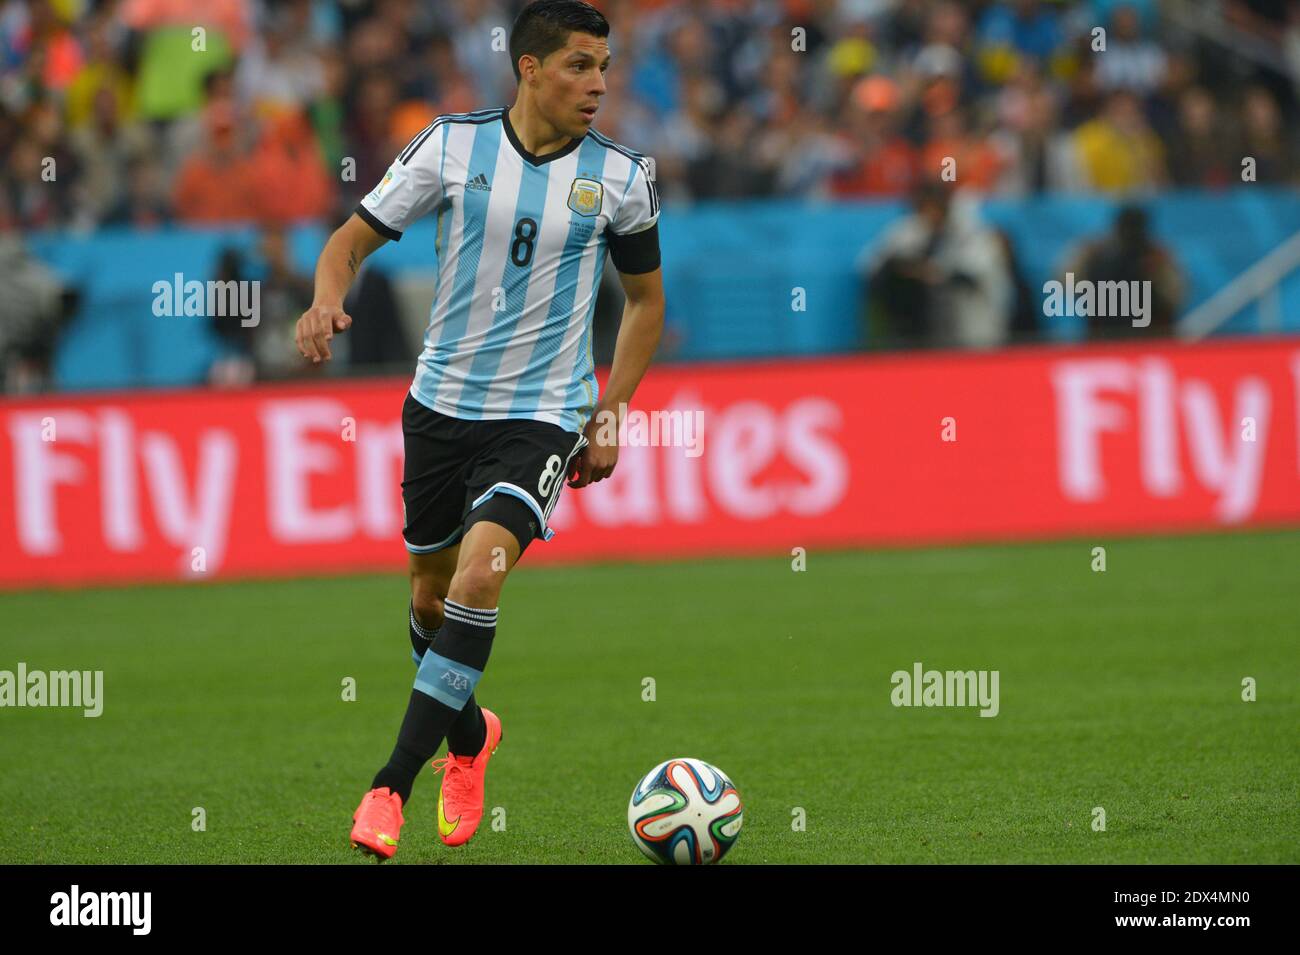 Argentina's Enzo Perez during Soccer World Cup Semi Final match Netherlands v Argentina at Itaquera Stadium, Sao Paulo, Brazil on July 9, 2014. Argentina won on the penalty shoot-out 5-3 after a 0-0 score. Photo by Henri Szwarc/ABACAPRESS.COM Stock Photo